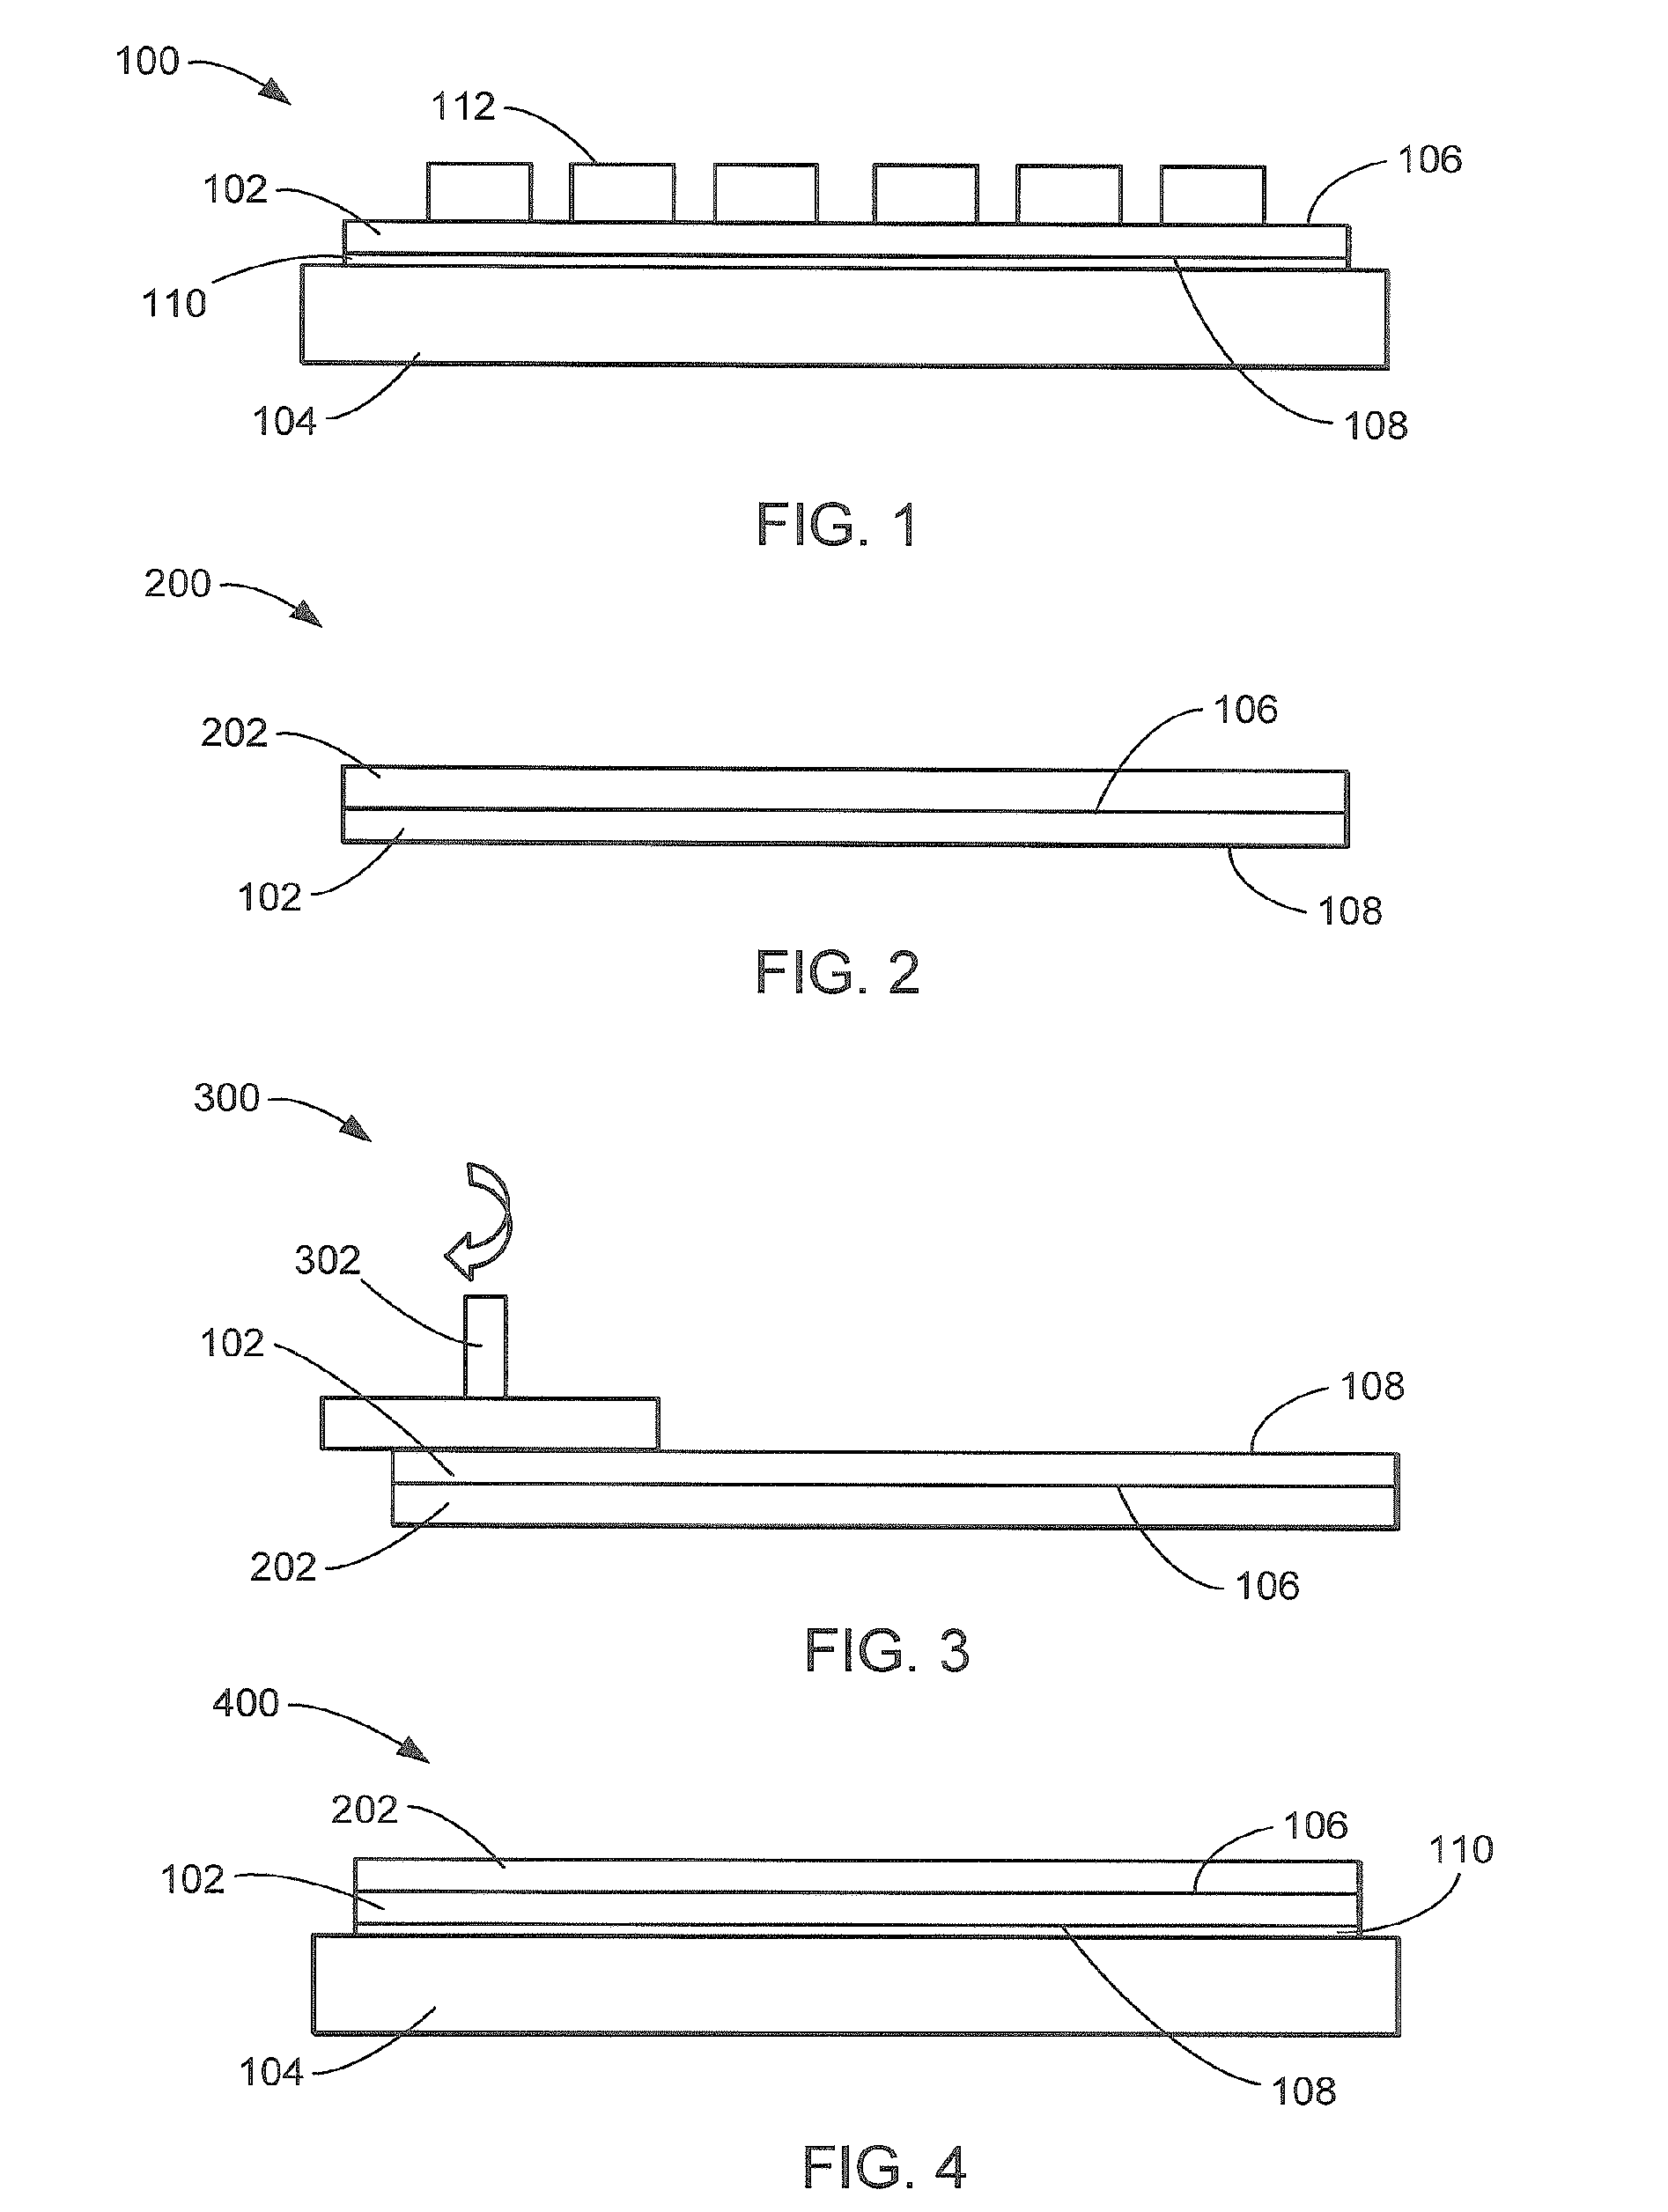 Ultra-thin wafer system